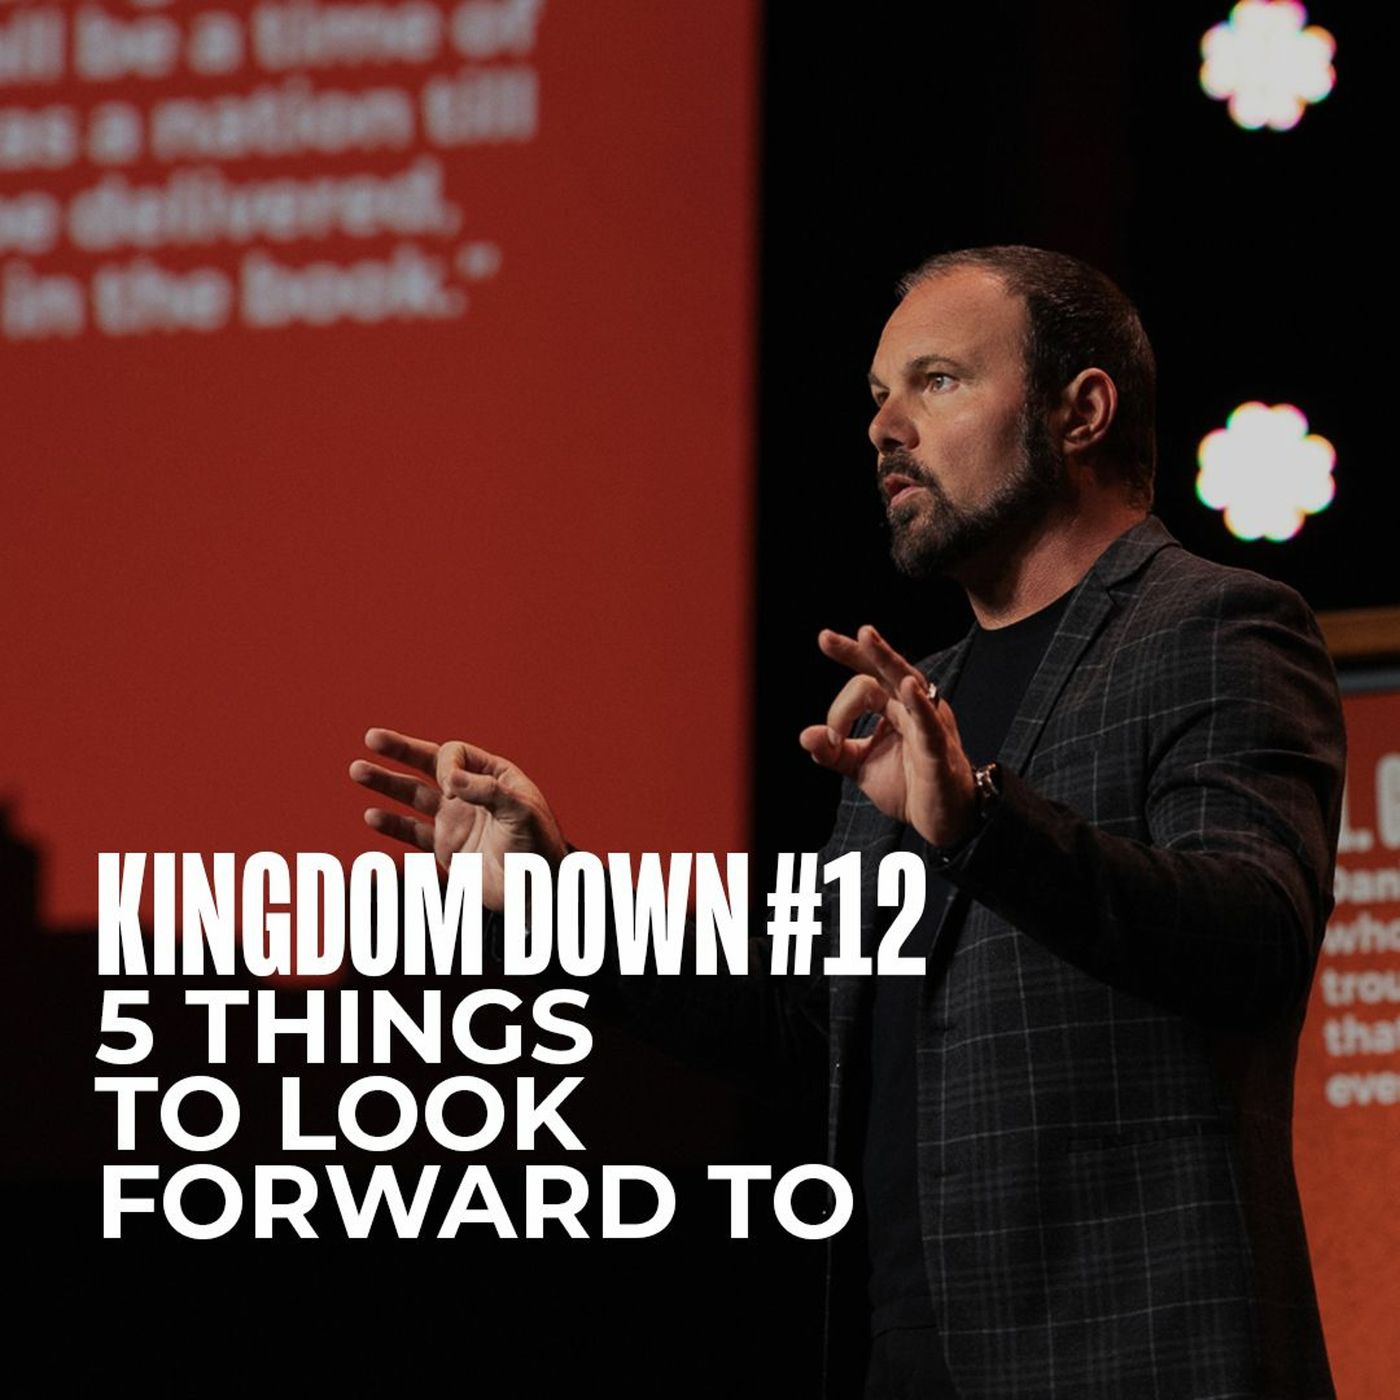 Kingdom Down #12 - 5 Things to Look Forward to